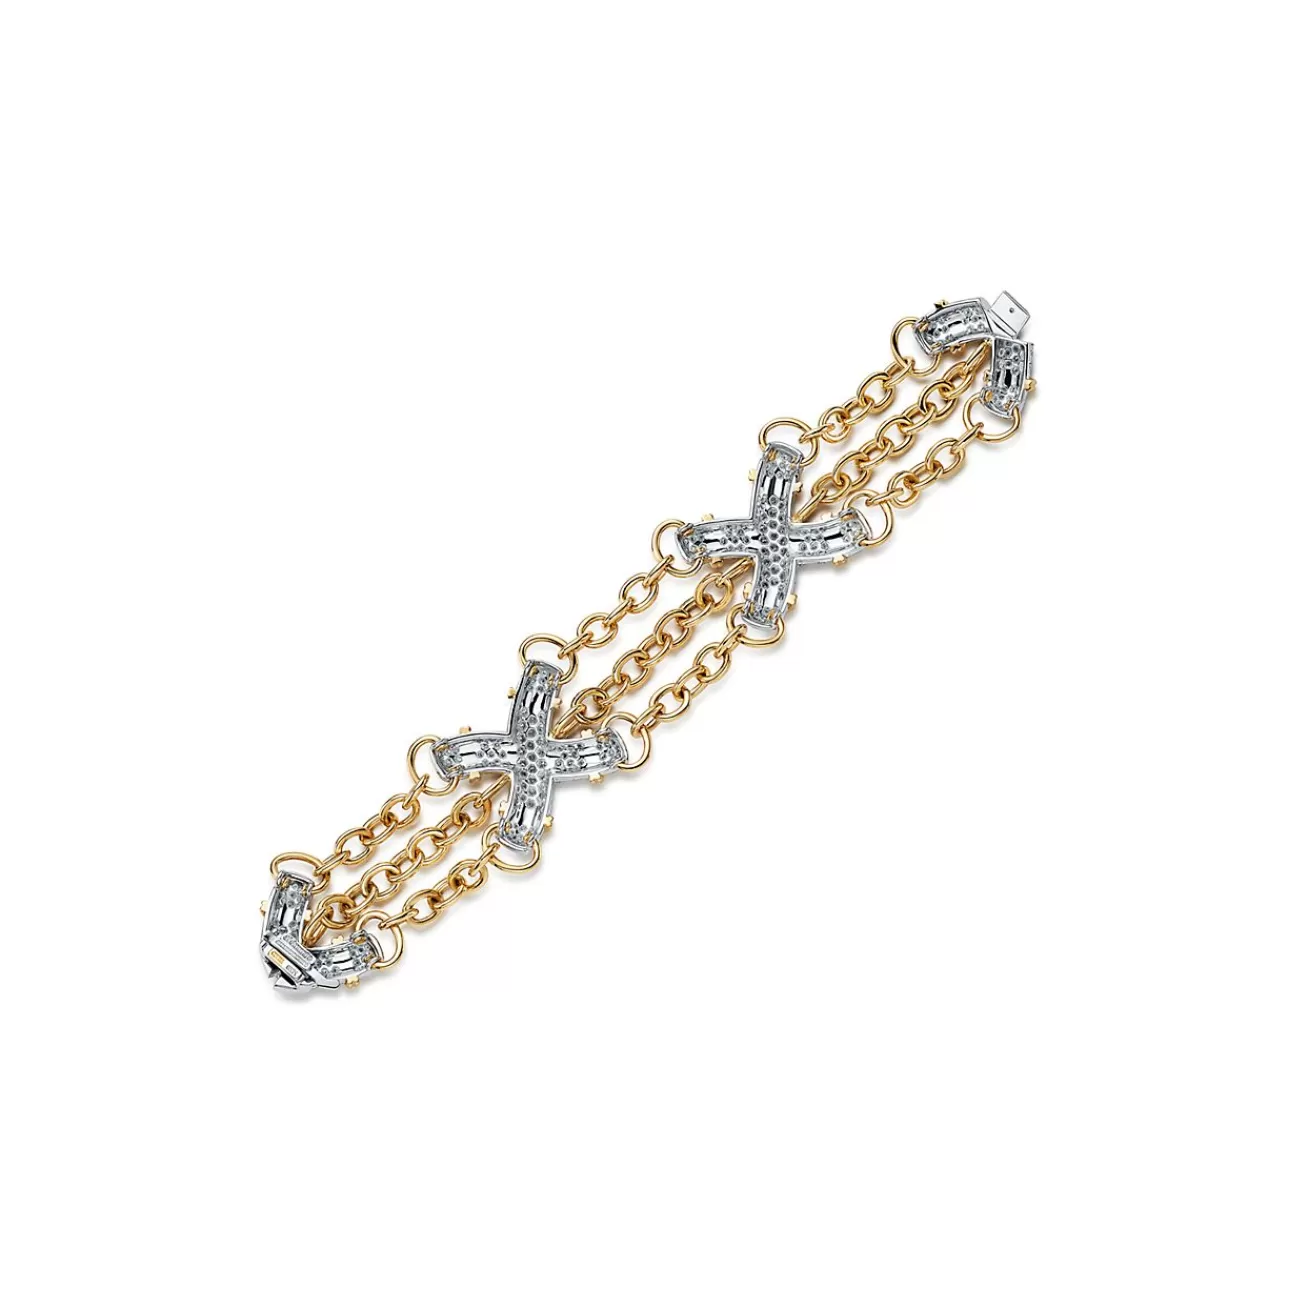 Tiffany & Co. Bracelet in Platinum and Yellow Gold with Diamonds | ^ Bracelets | Gold Jewelry